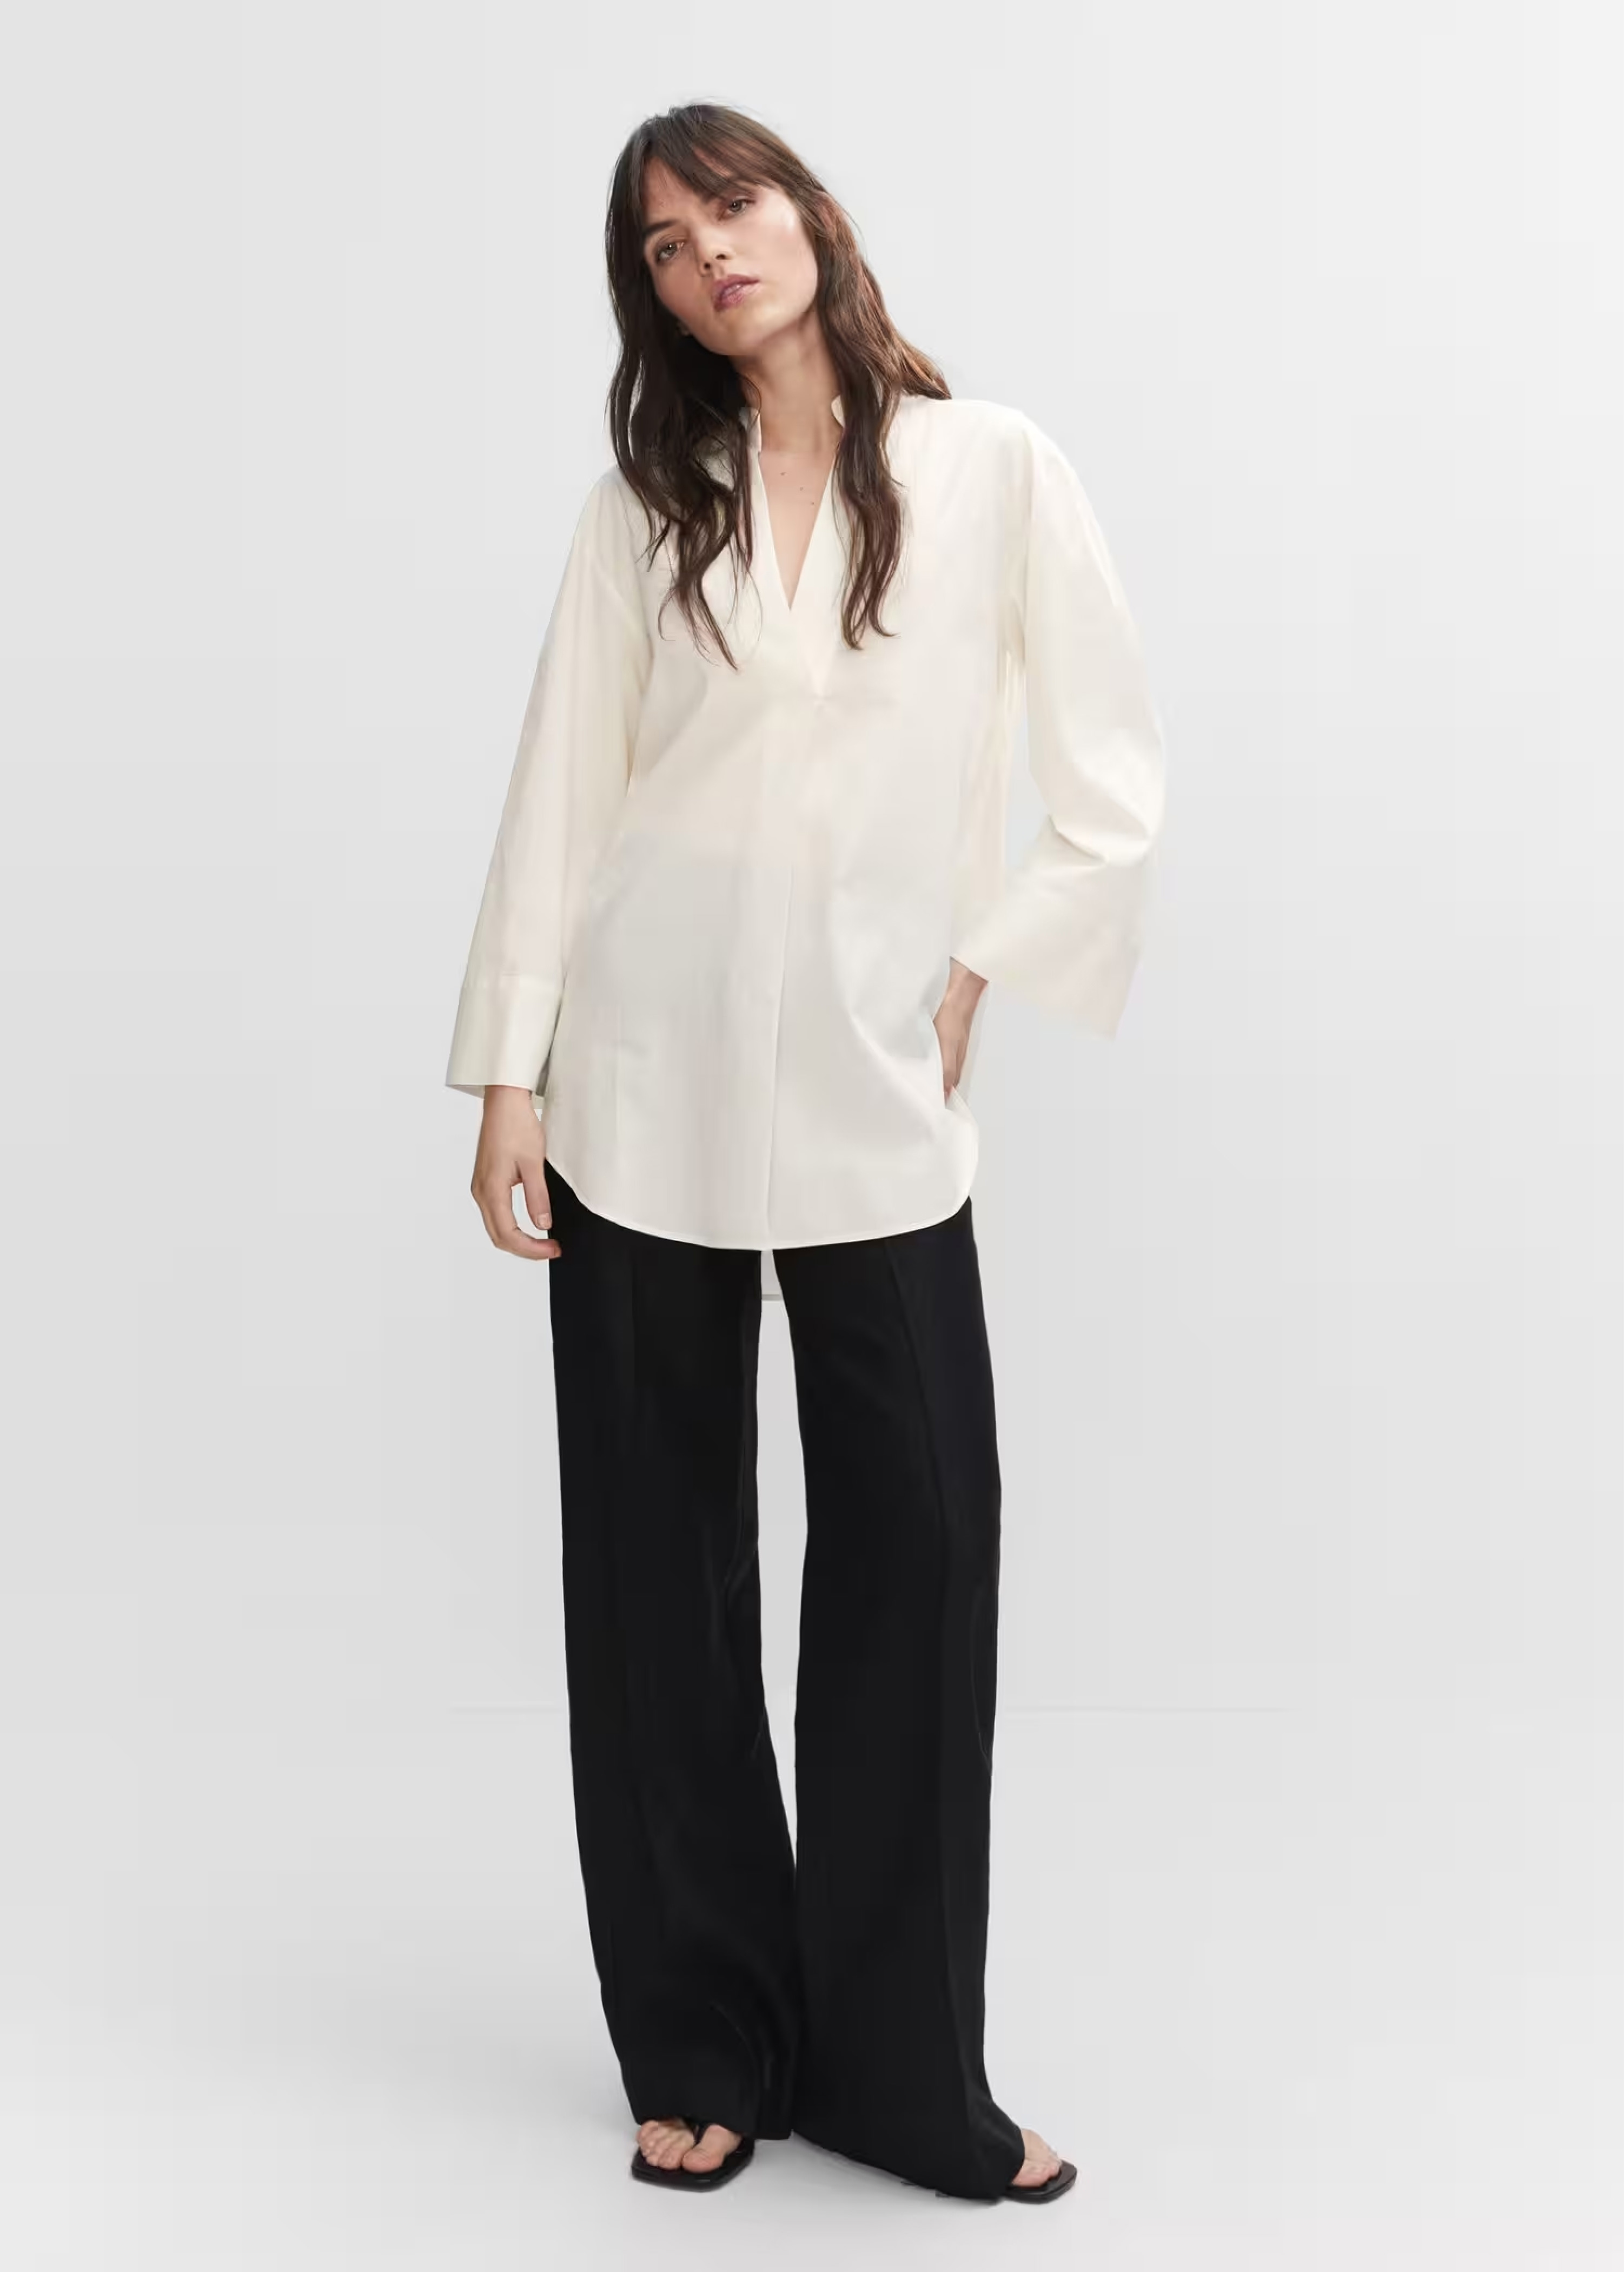 Woman wearing an oversize look with a white shirt and basic black trousers.